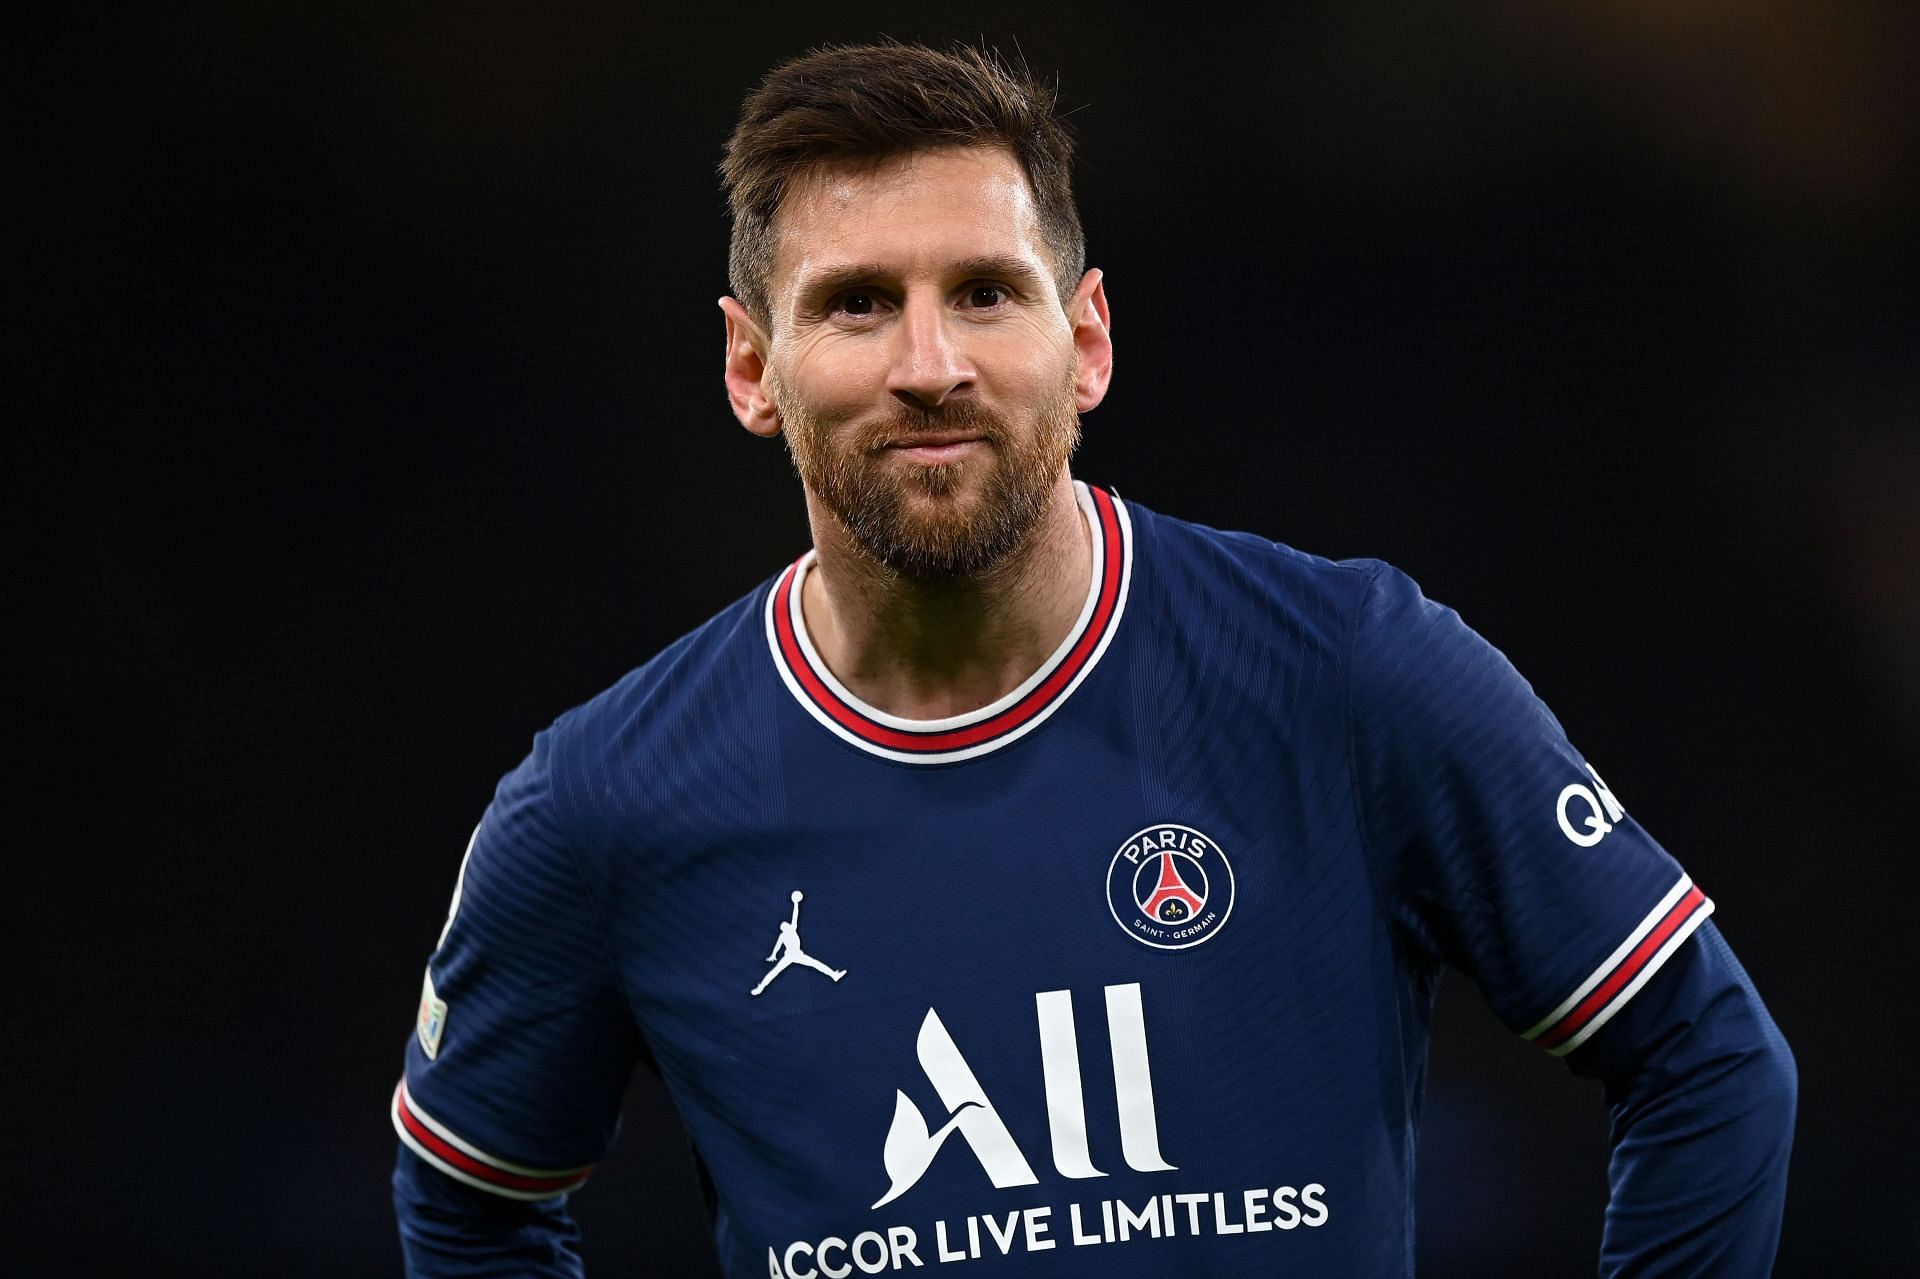 PSG and global icon Lionel Messi